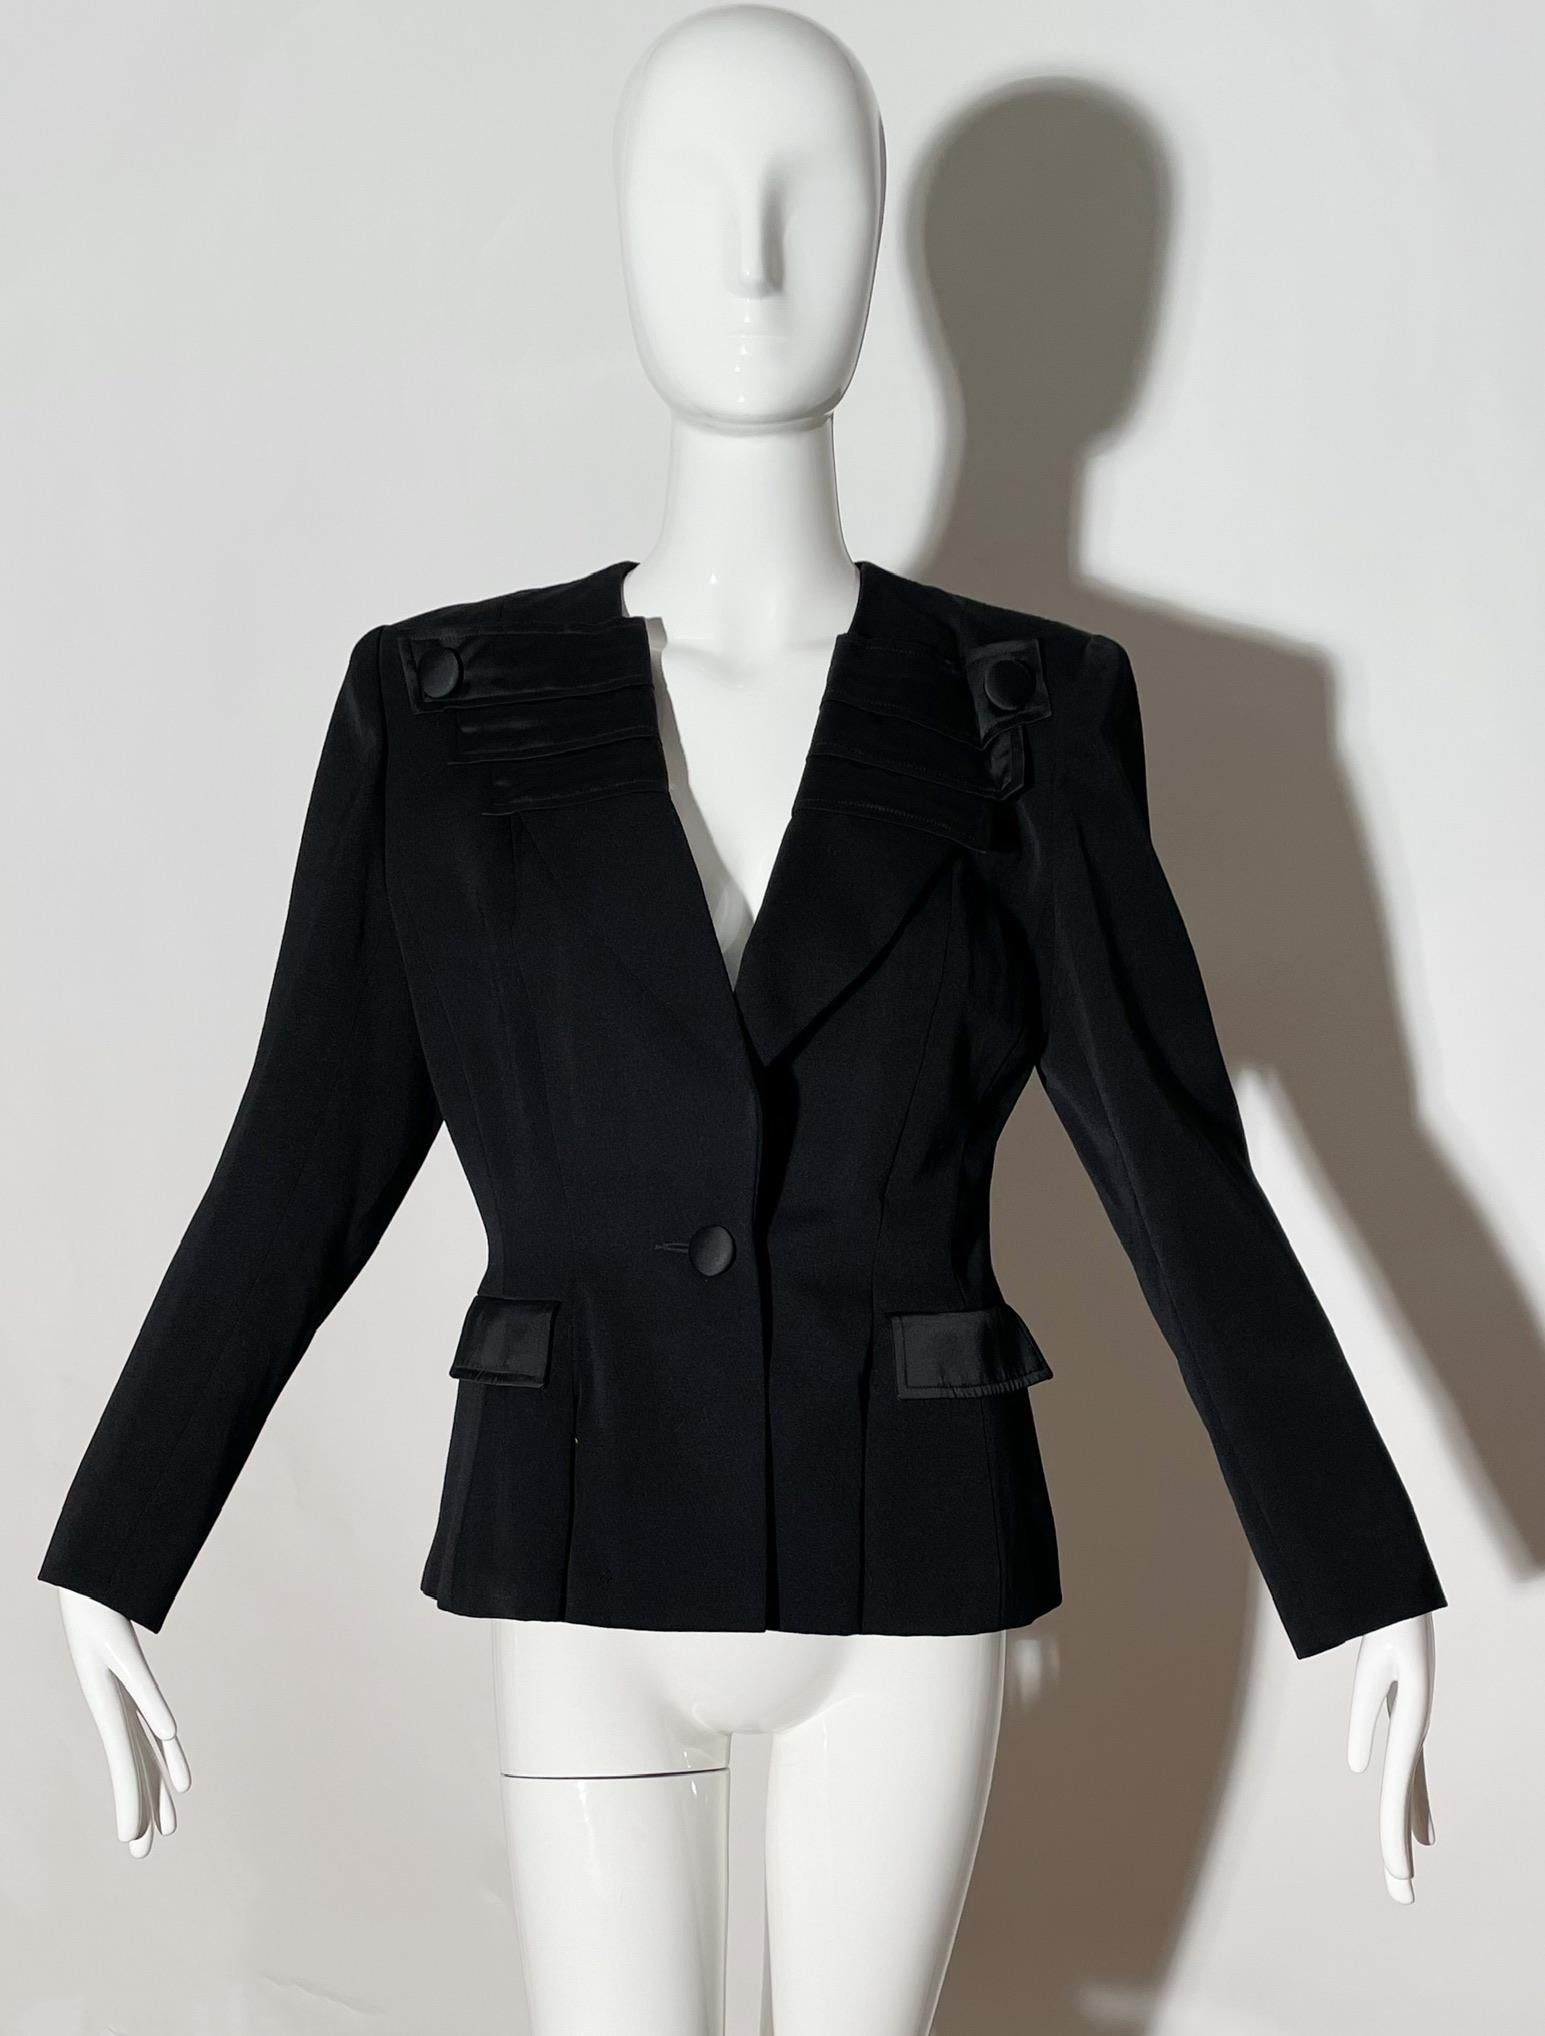 Black blazer with silk lapel. Front pockets. Button details. Cotton blend. Made in France.
*Condition: Excellent vintage condition. No visible Flaws.

Measurements Taken Laying Flat (inches)—
Shoulder to Shoulder: 17 in.
Sleeve Length: 22 in.
Bust: